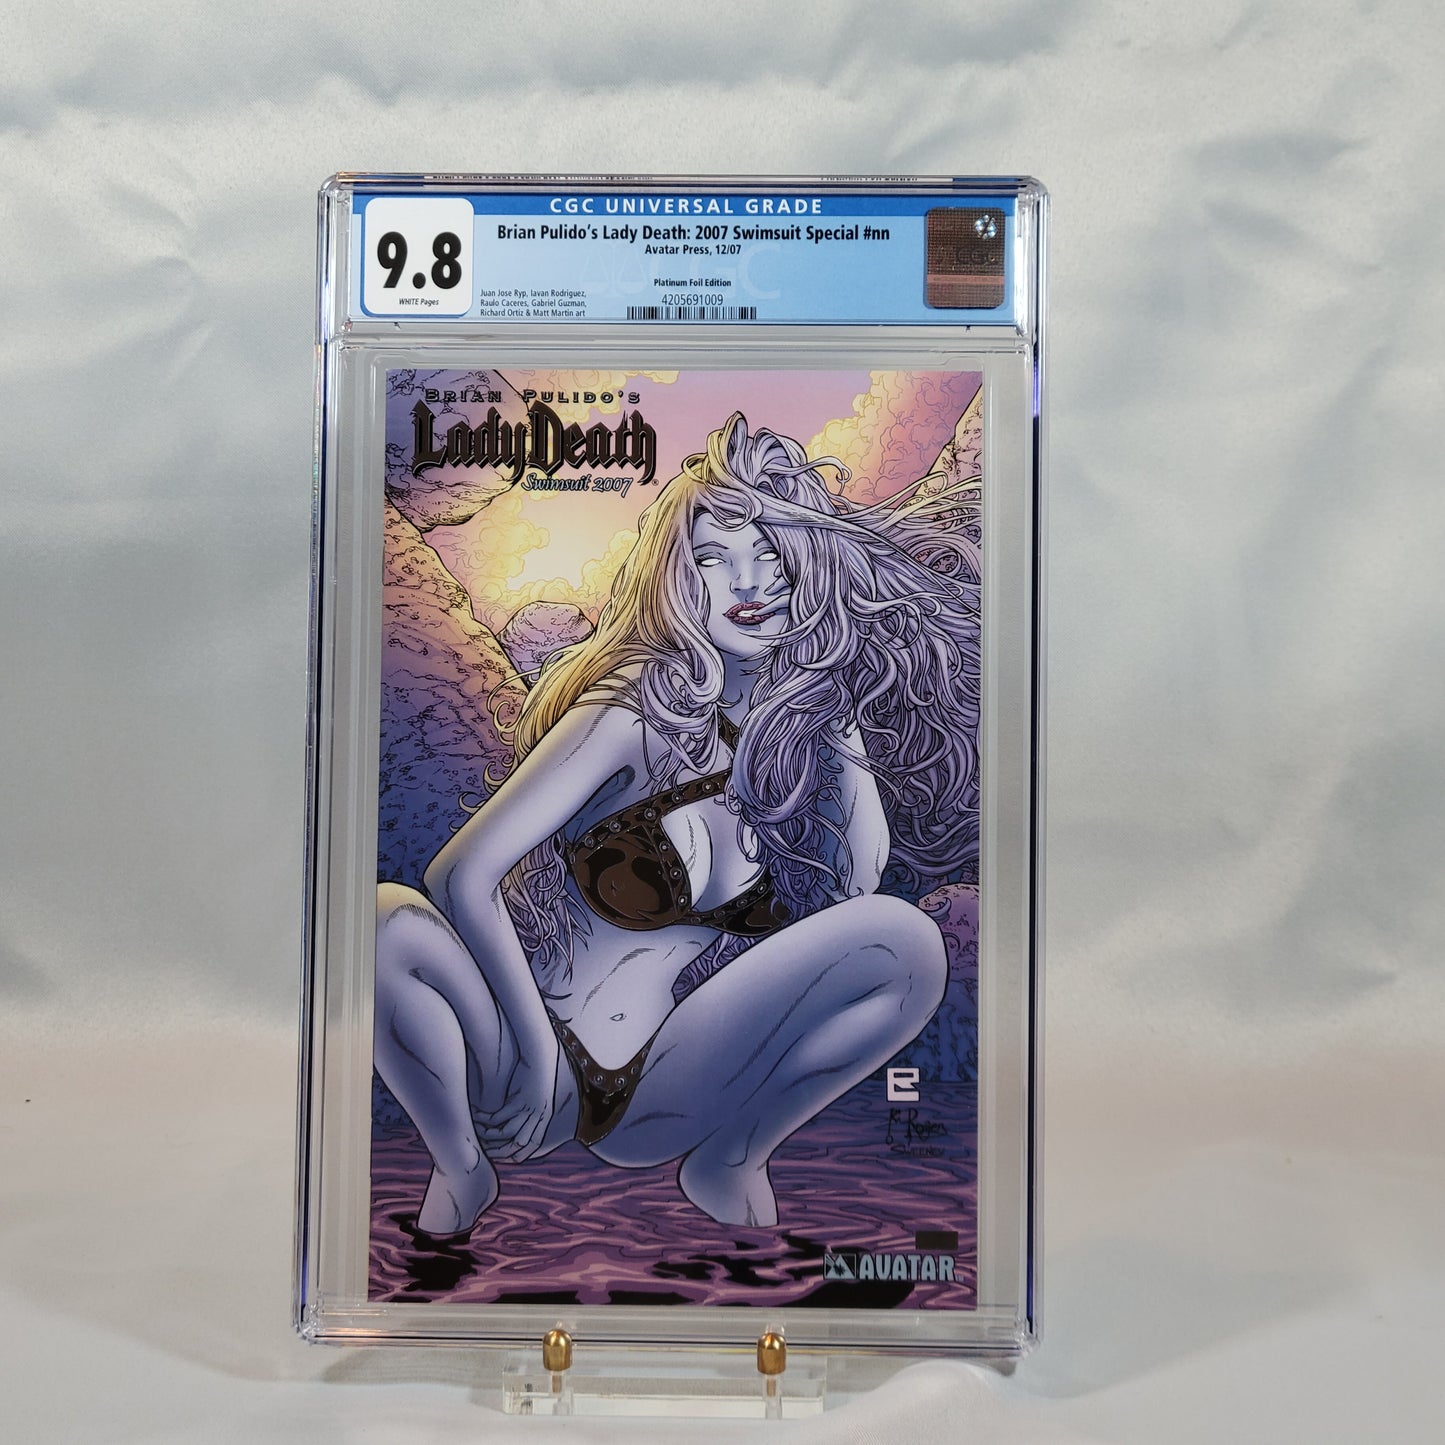 Brian Pulido's Lady Death: 2007 Swimsuit Special "Gold" & "Platinum" Foil Collection